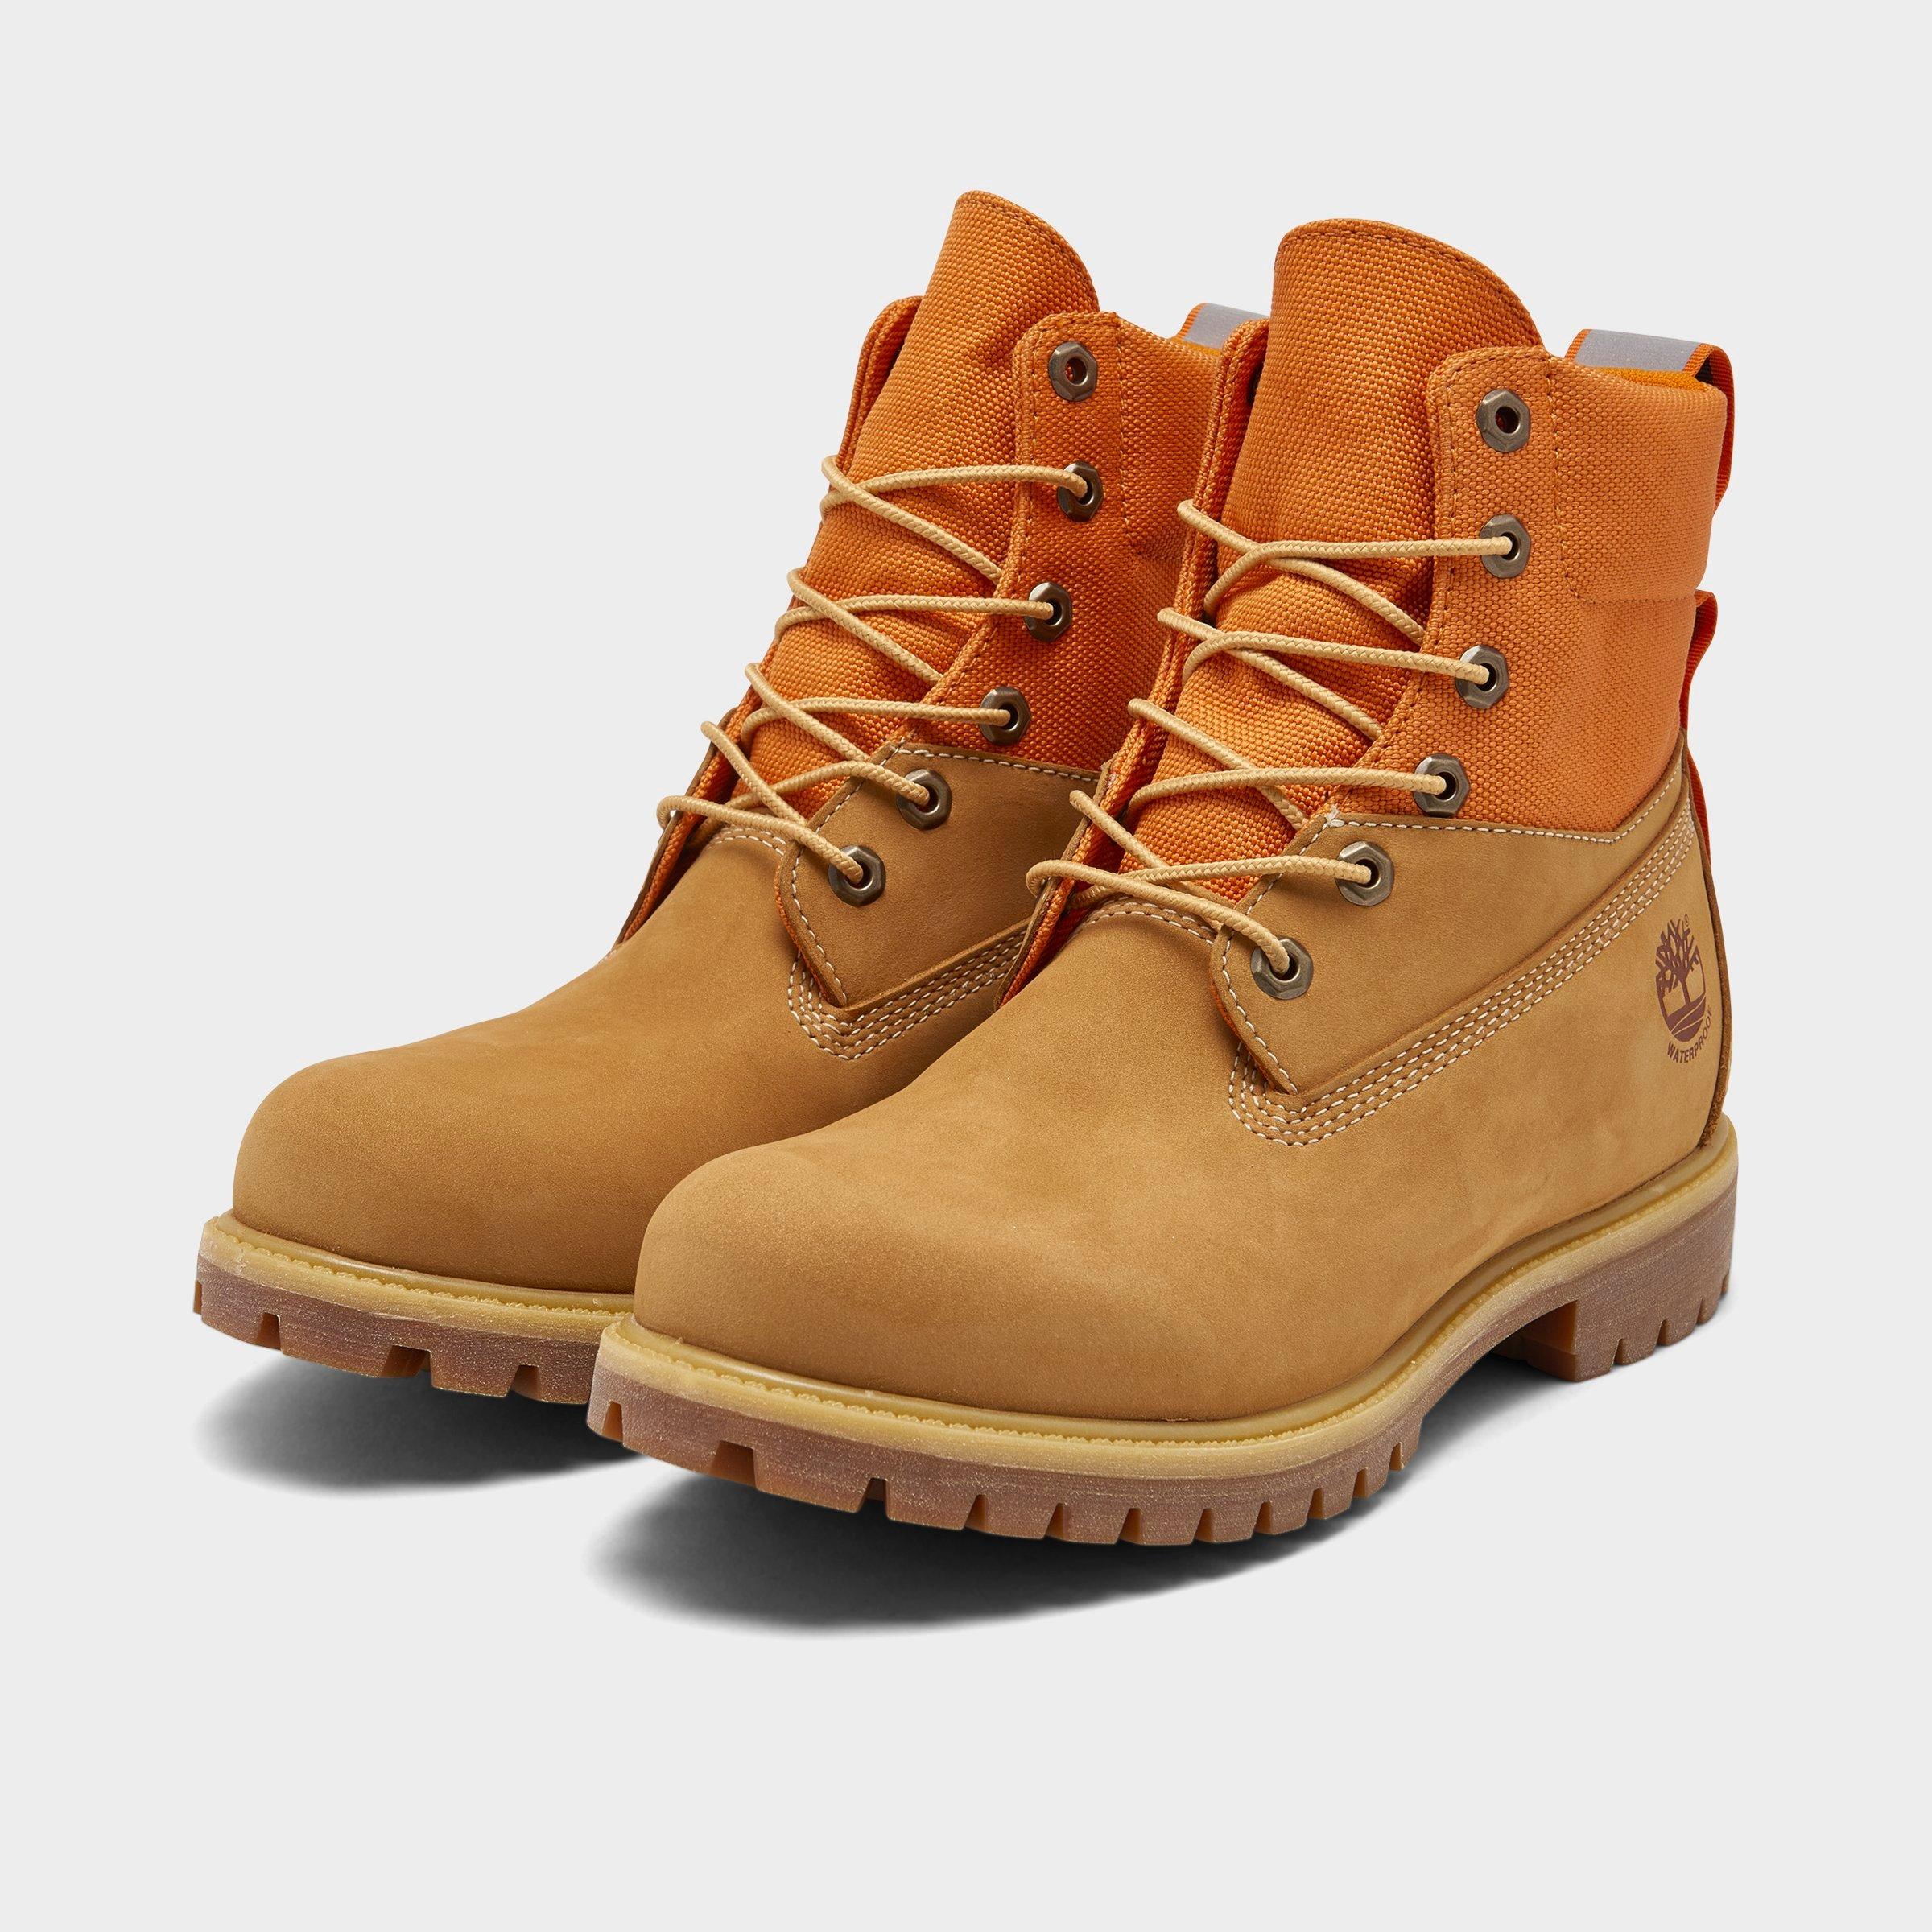 men's classic 6 inch timberland boots